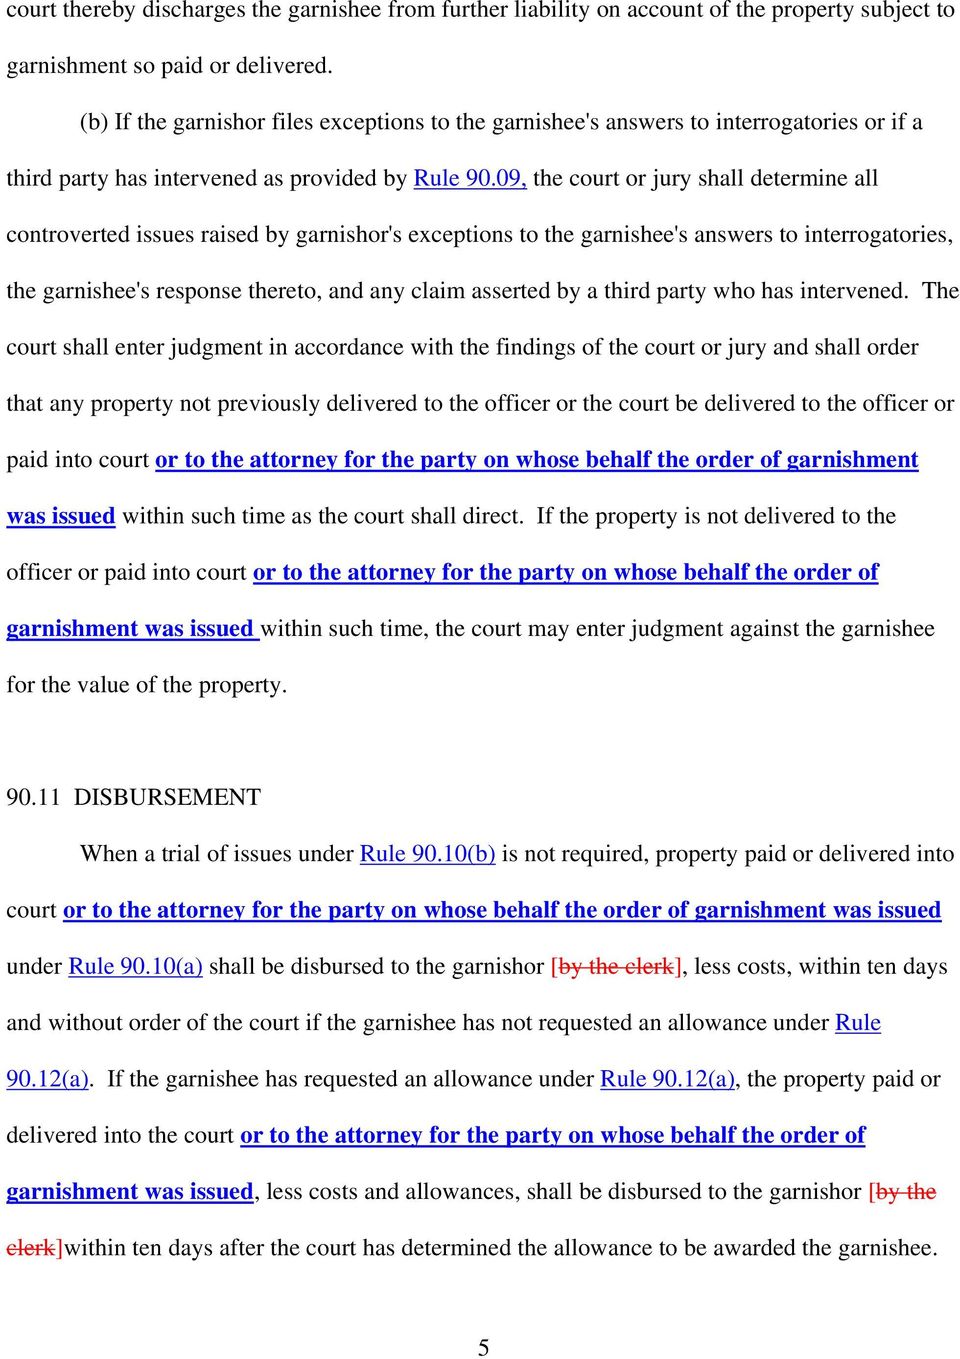 09, the court or jury shall determine all controverted issues raised by garnishor's exceptions to the garnishee's answers to interrogatories, the garnishee's response thereto, and any claim asserted